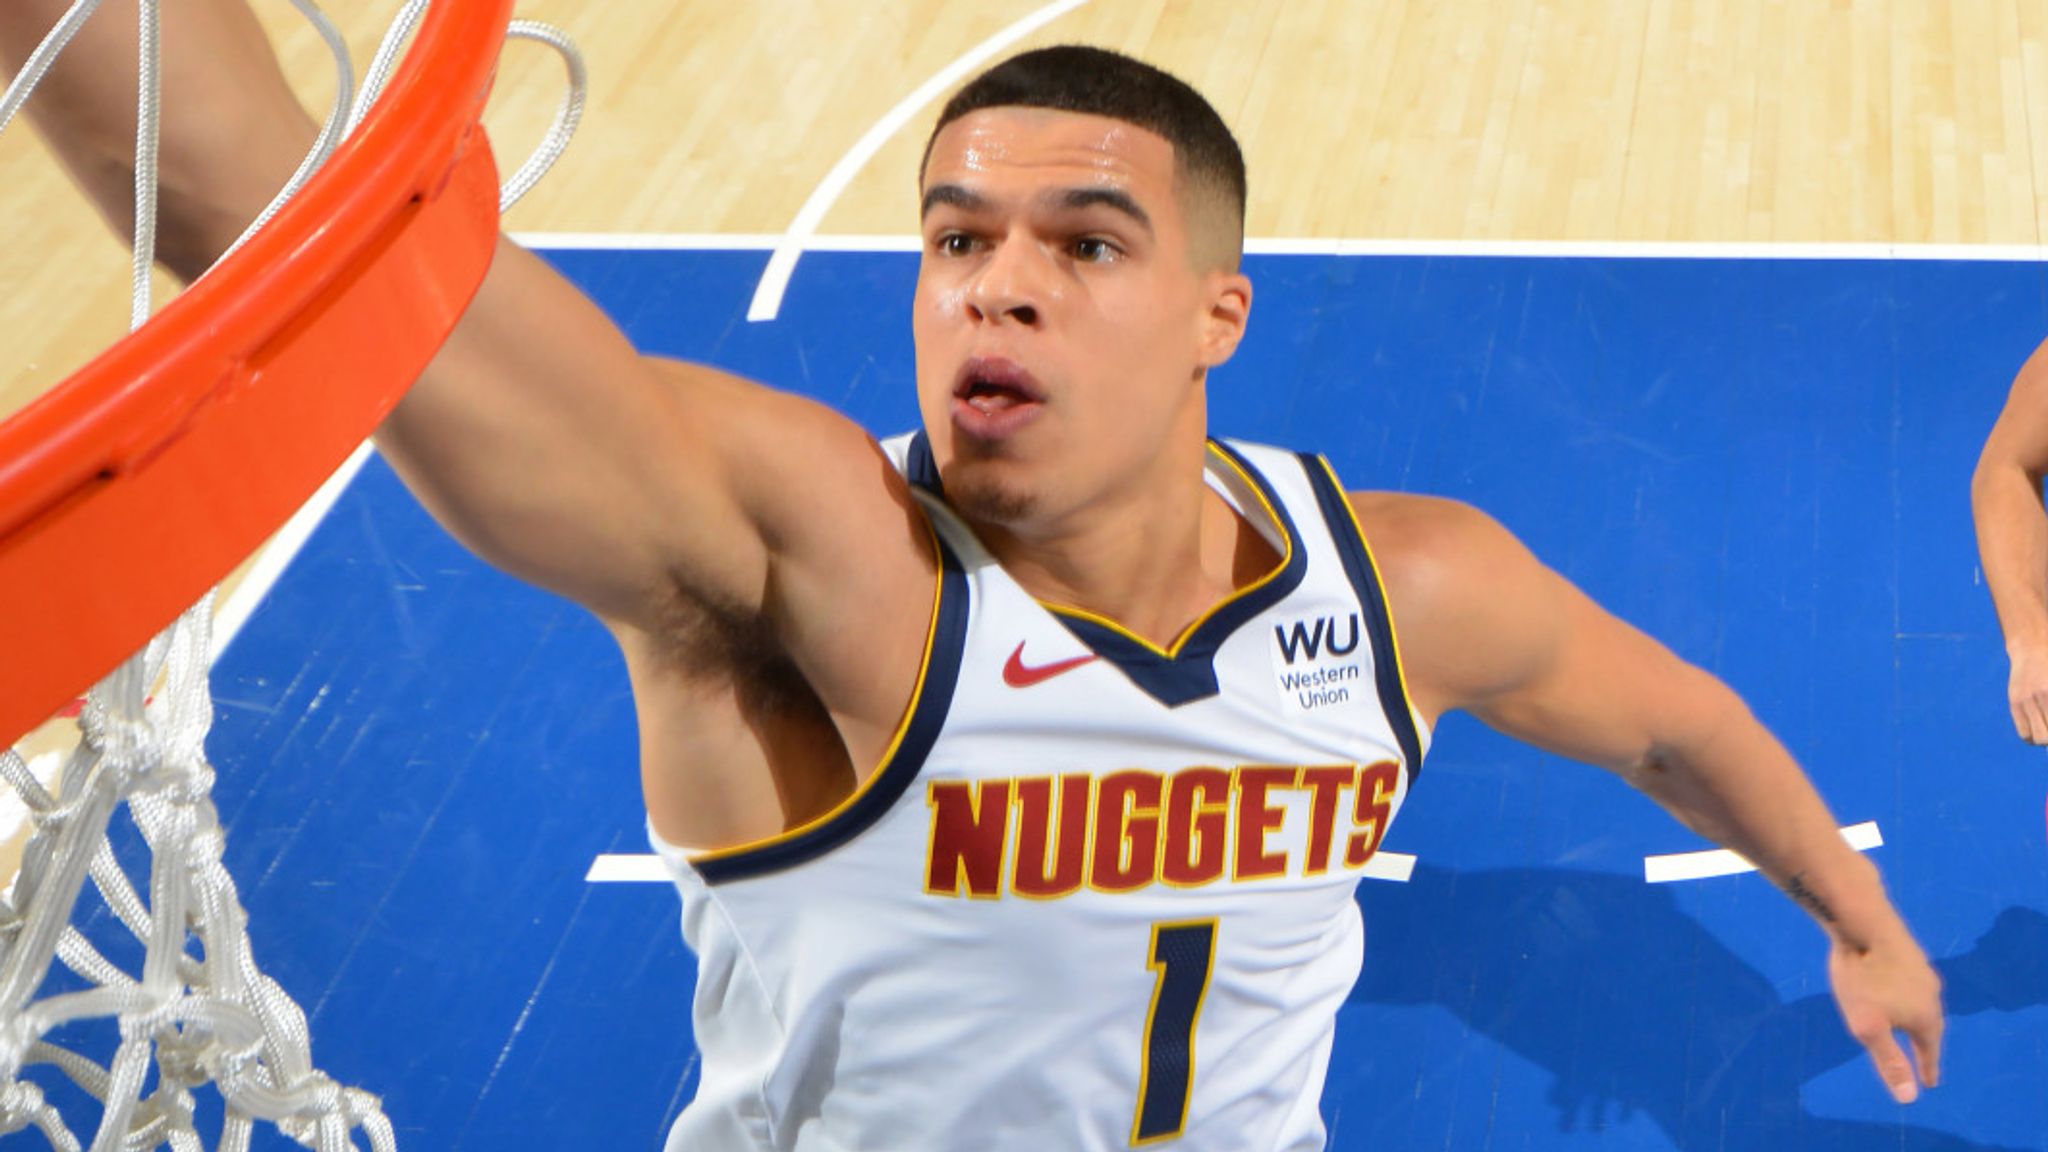 The Denver Nuggets need Michael Porter Jr. to play like a